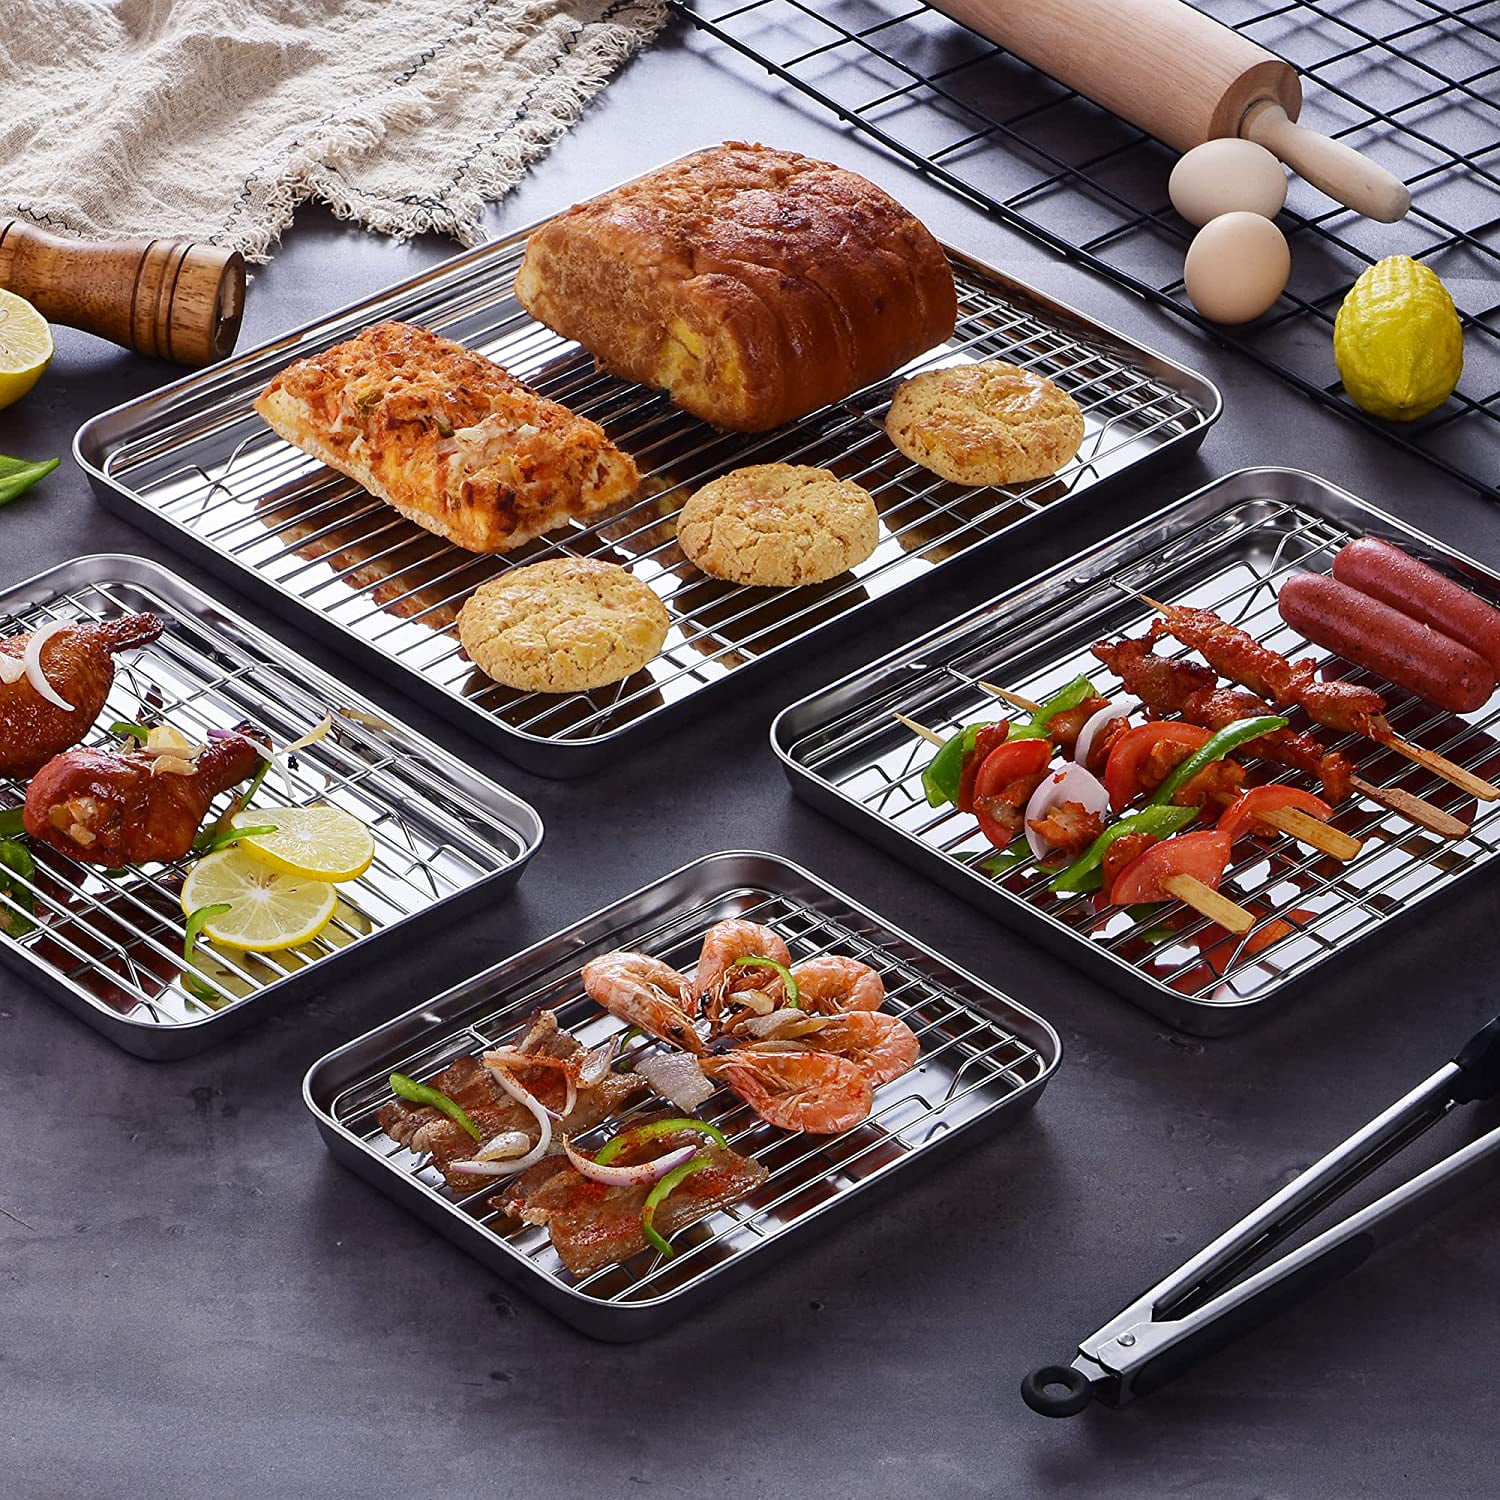  Stainless Steel Baking Sheet with Rack Set, E-far 12.4”x9.7” Cookie  Sheet Broiling Pan for Oven, Rimmed Metal Tray with Wire Rack for Cooking/ Baking/Cooling/Bacon, Non-toxic & Dishwasher Safe: Home & Kitchen